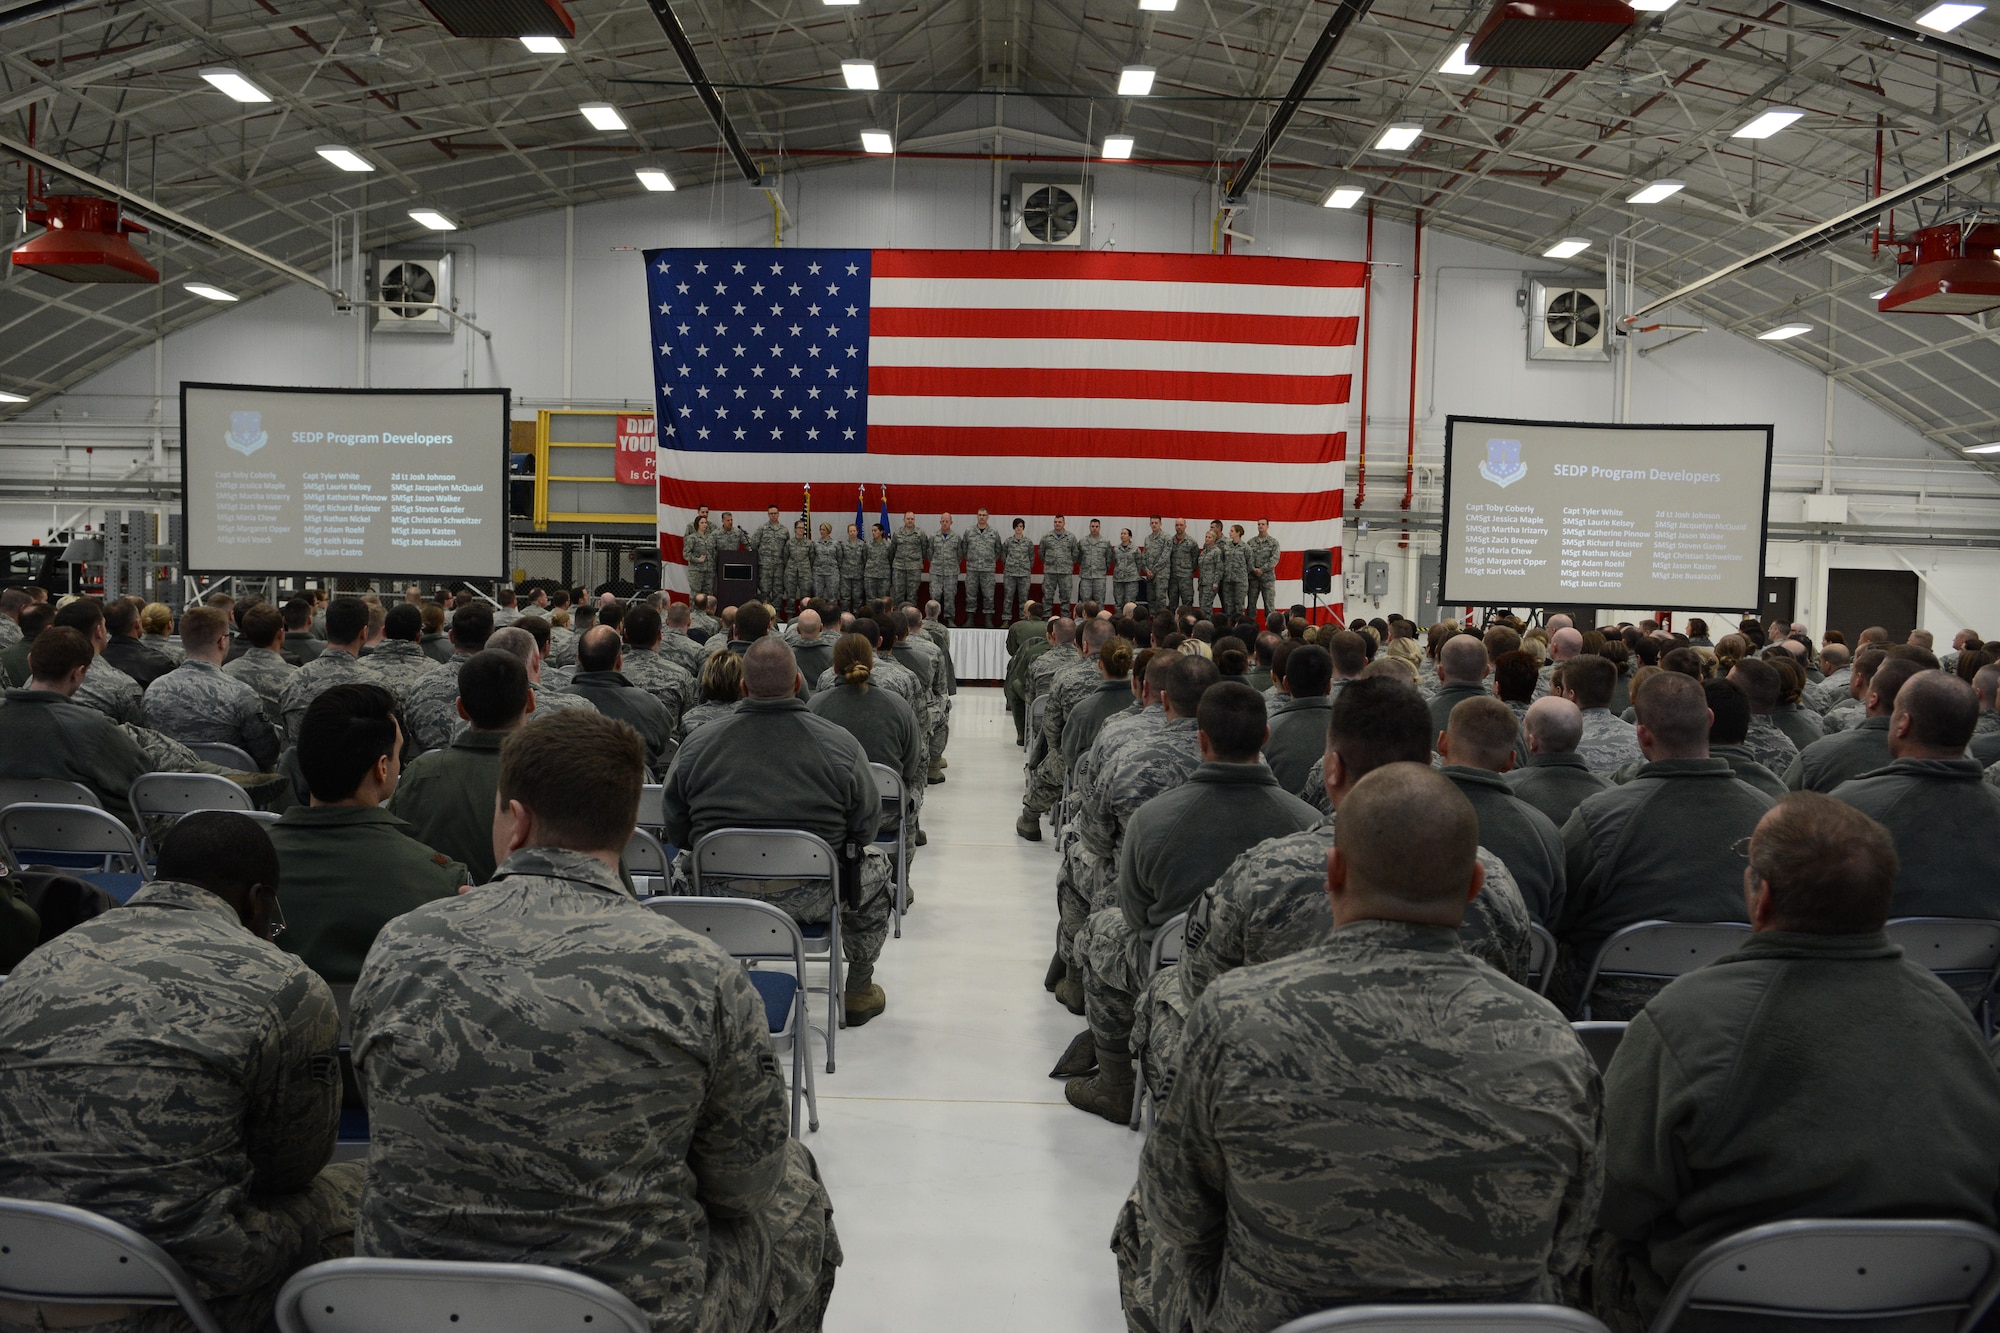 Senior Enlisted Development Program leaders stand on stage and are recognized for their 2015 achievements during the first annual awards ceremony in Hangar 406 on Feb. 7, 2016. The ceremony was used to recognize the achievements of several Airmen throughout base. (U.S. Air National Guard photo by Staff Sgt. Andrea F. Rhode)